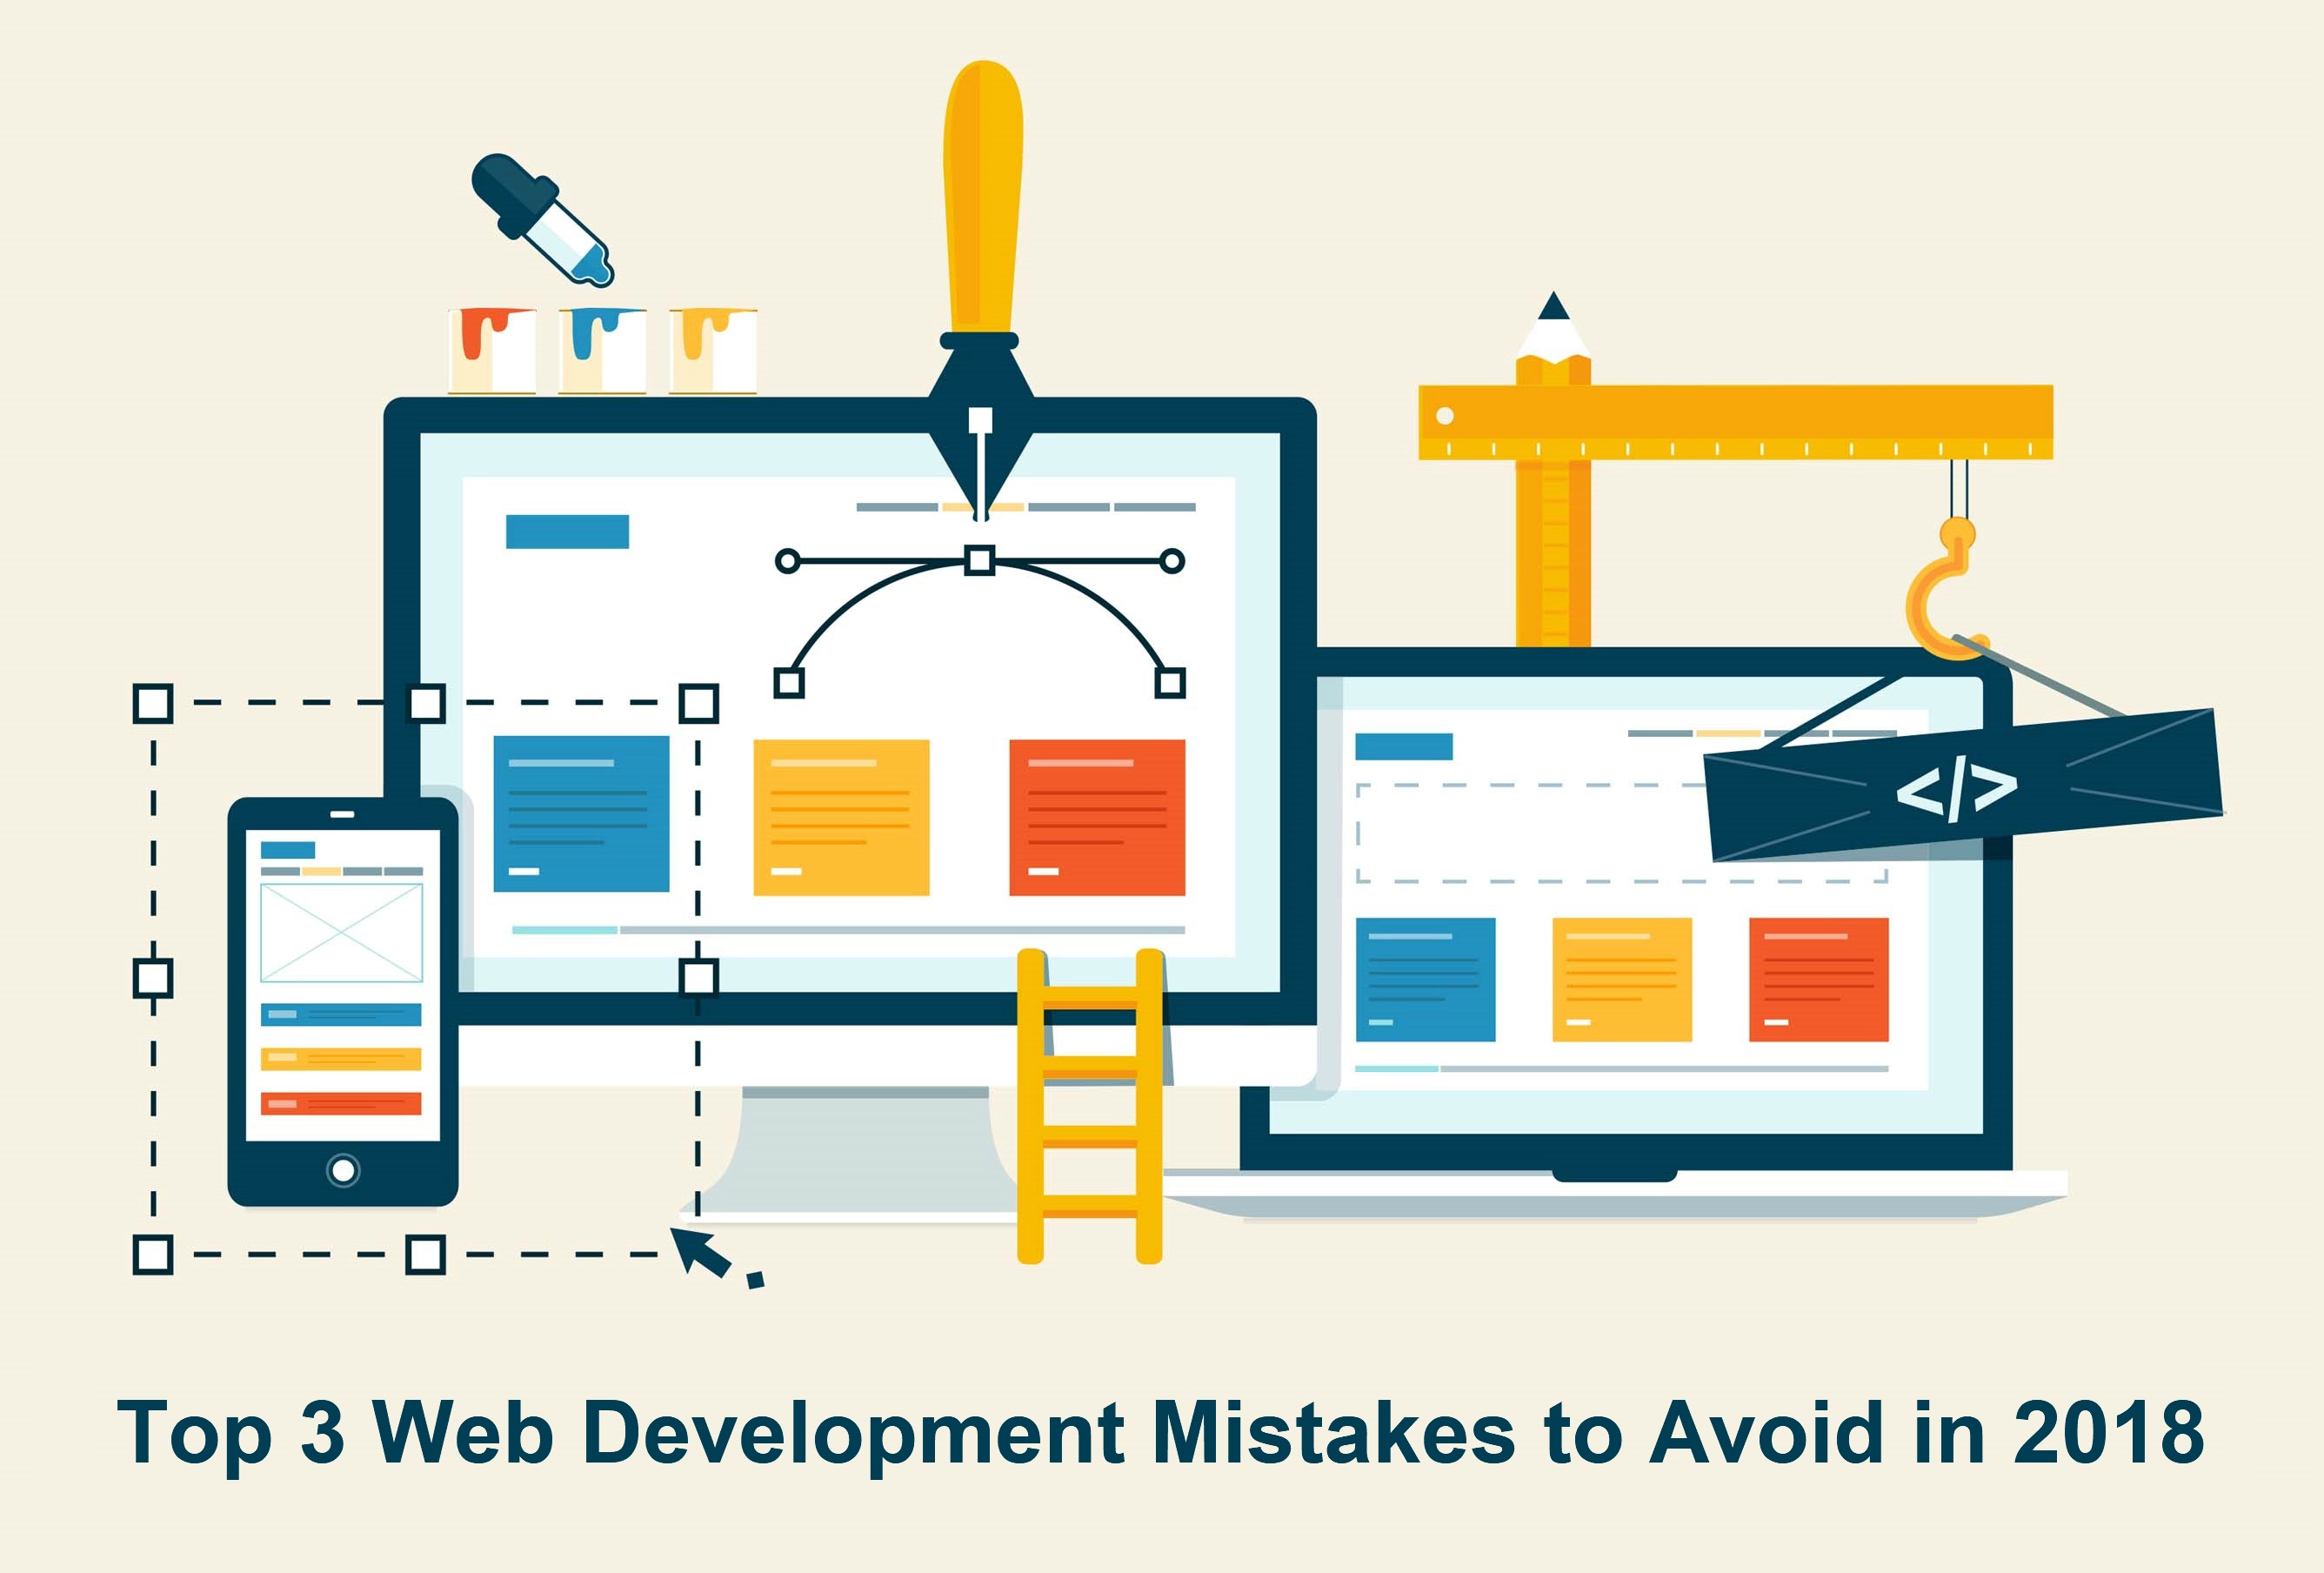 Top 3 Web Development Mistakes to Avoid in 2018 